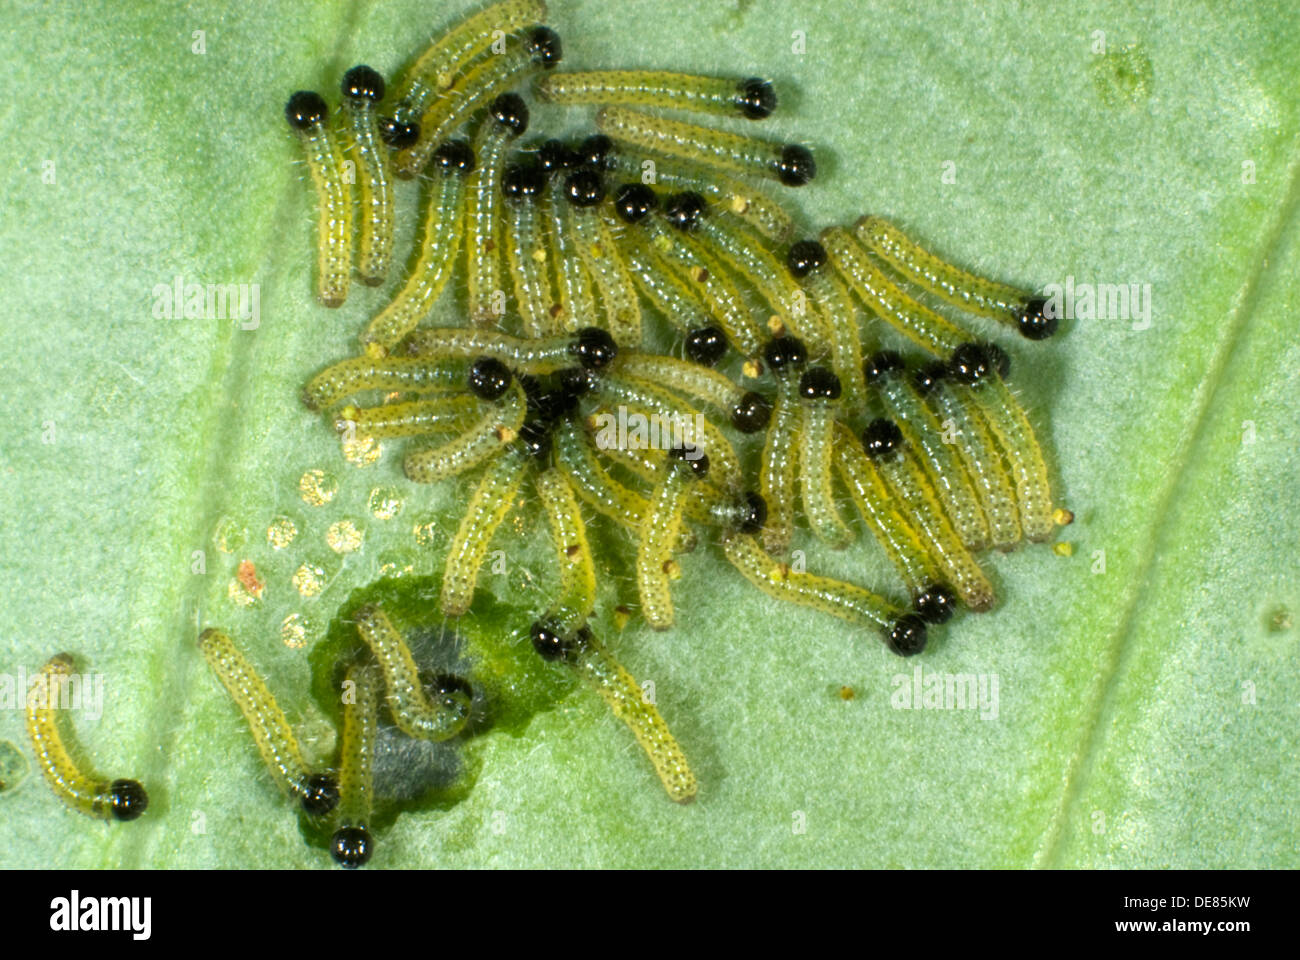 large or cabbage white butterfly, Pieris brassicae, neonate caterpillars feeding on a cabbage leaf Stock Photo